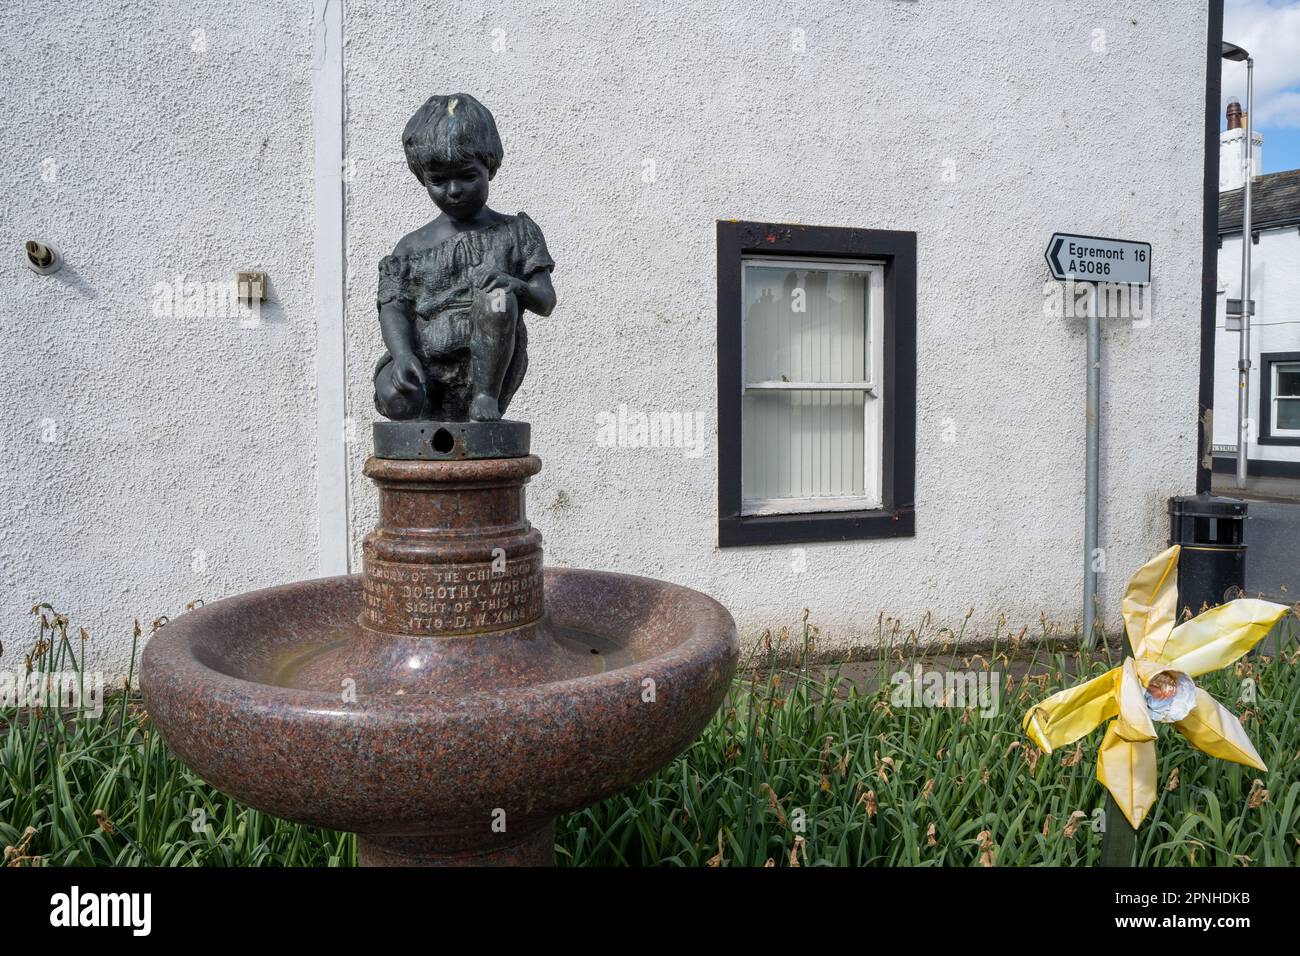 Water fountain in the town of Cockermouth, Cumberland, UK, dedicated to William and Dorothy Wordsworth. Stock Photo